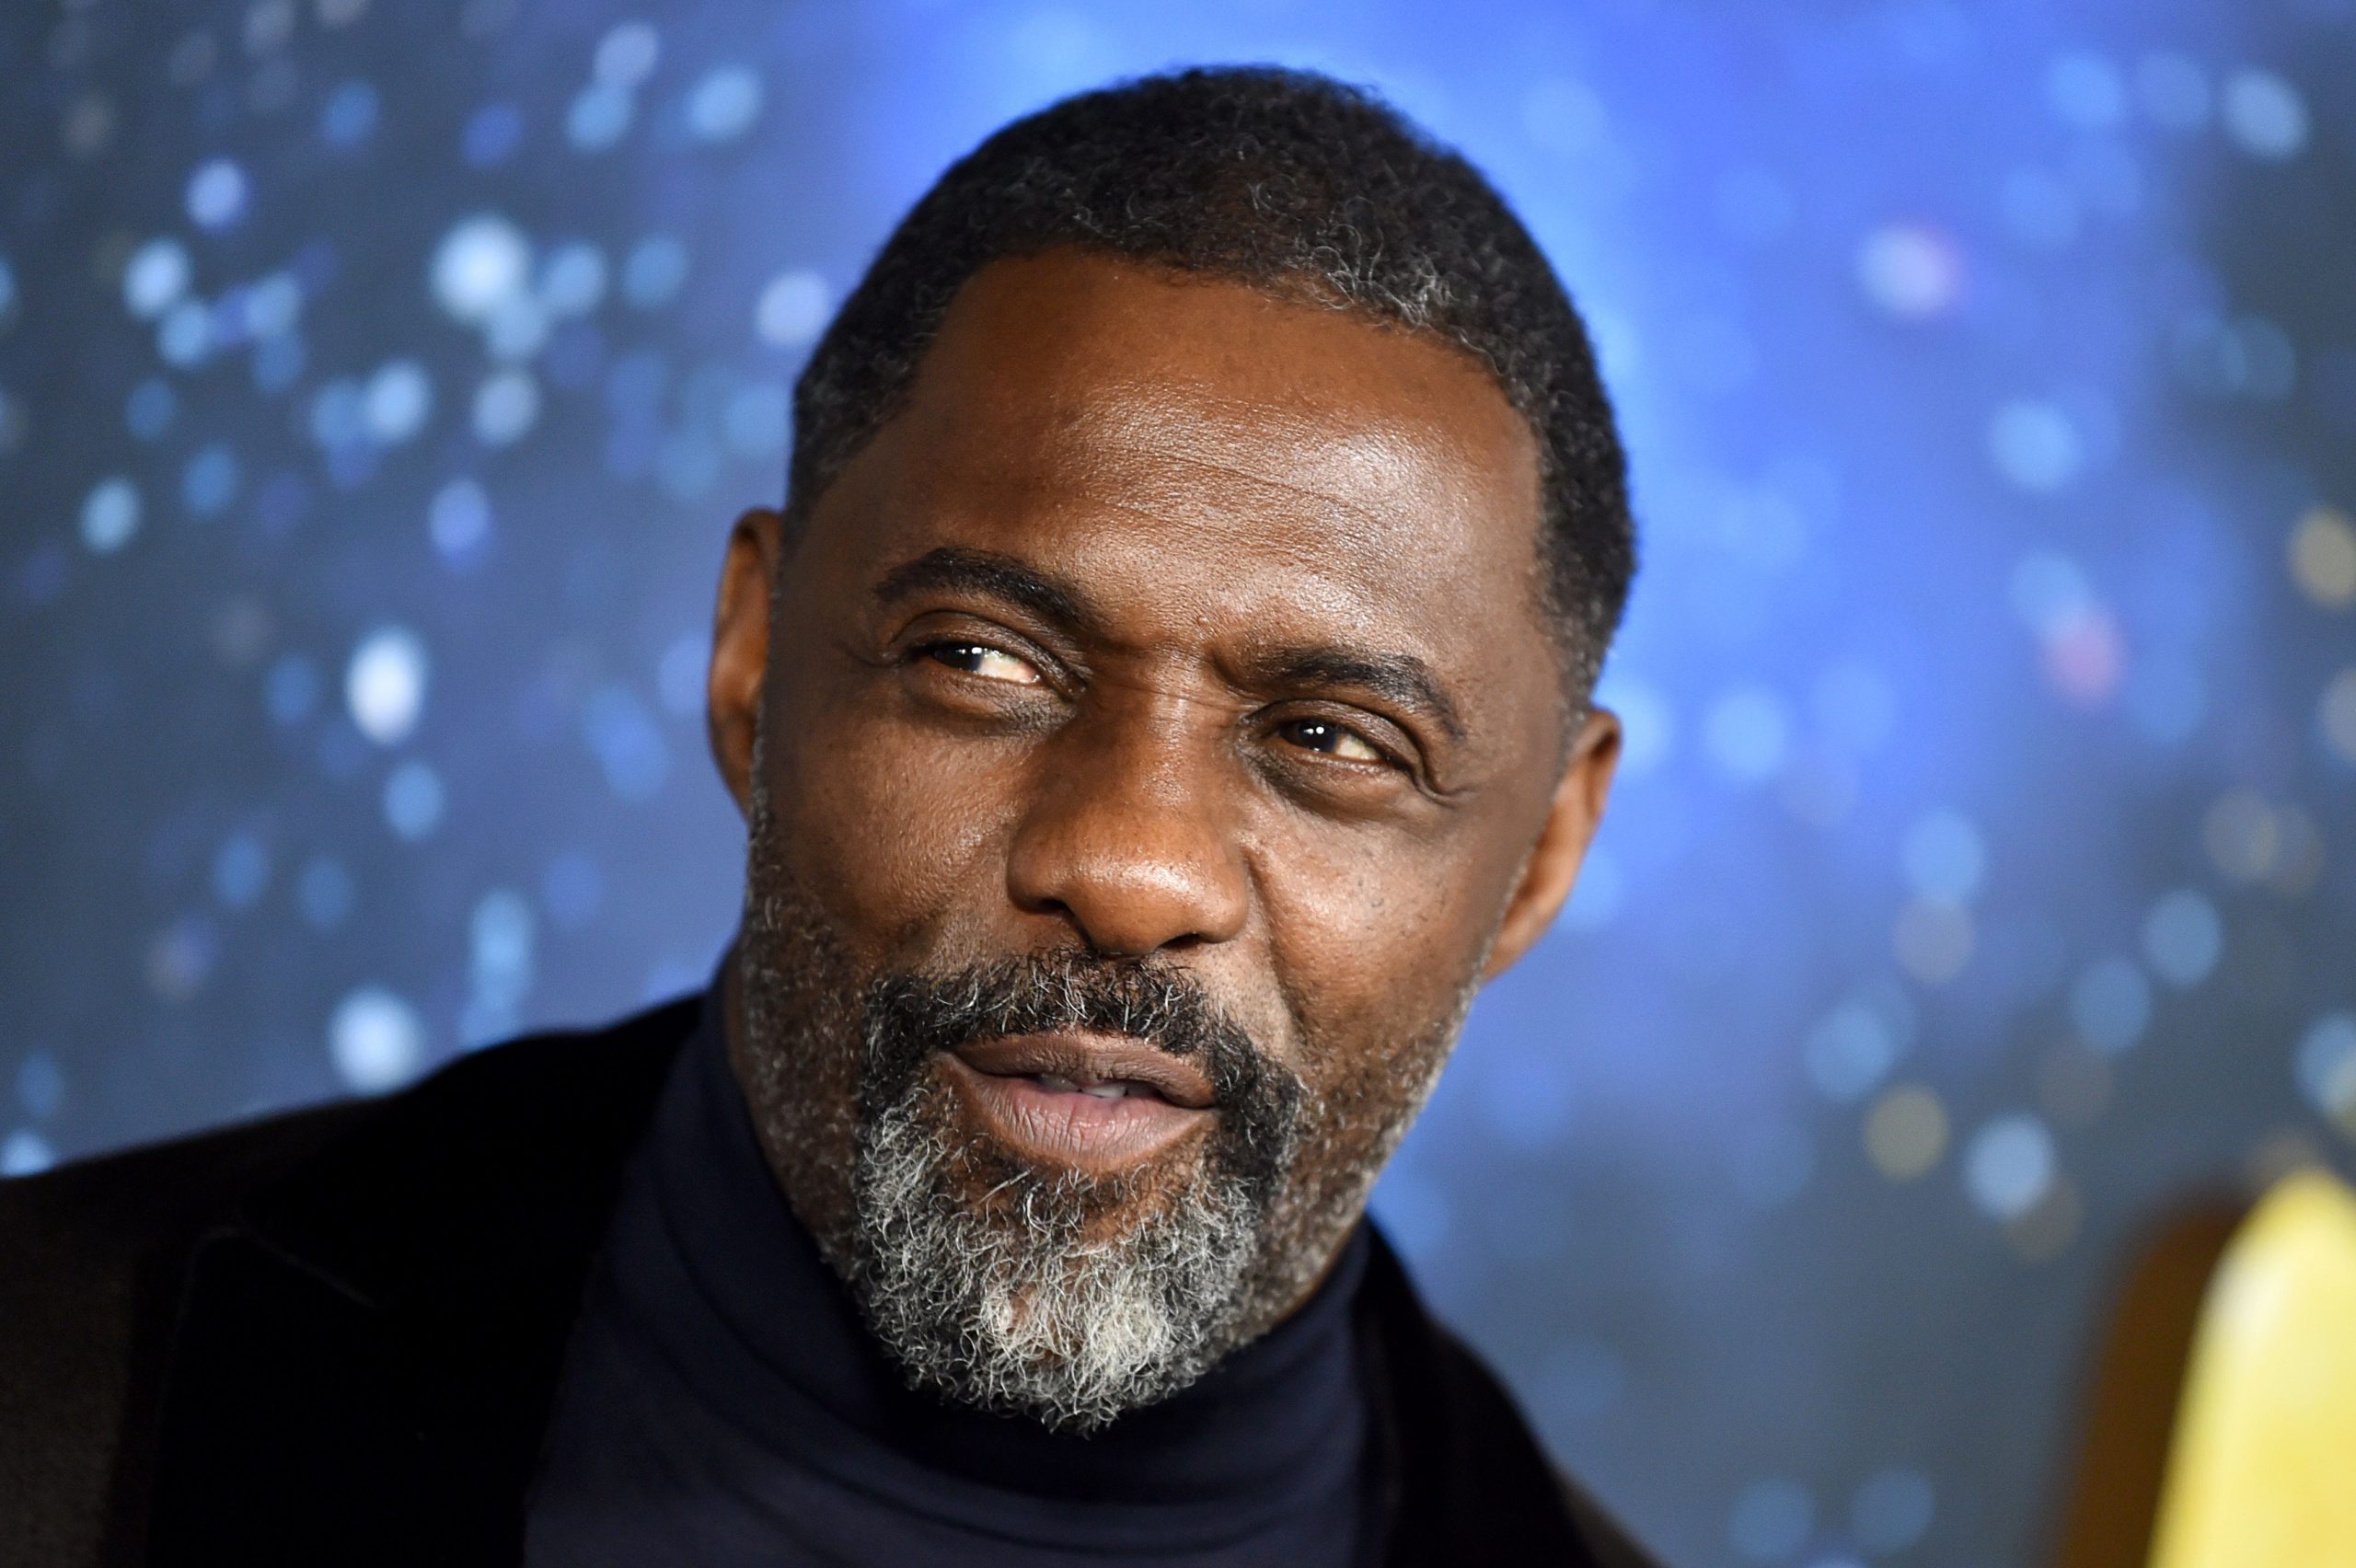 Idris Elba to be Honored With BAFTA's Special Award for 'Creative Contributions' to Television